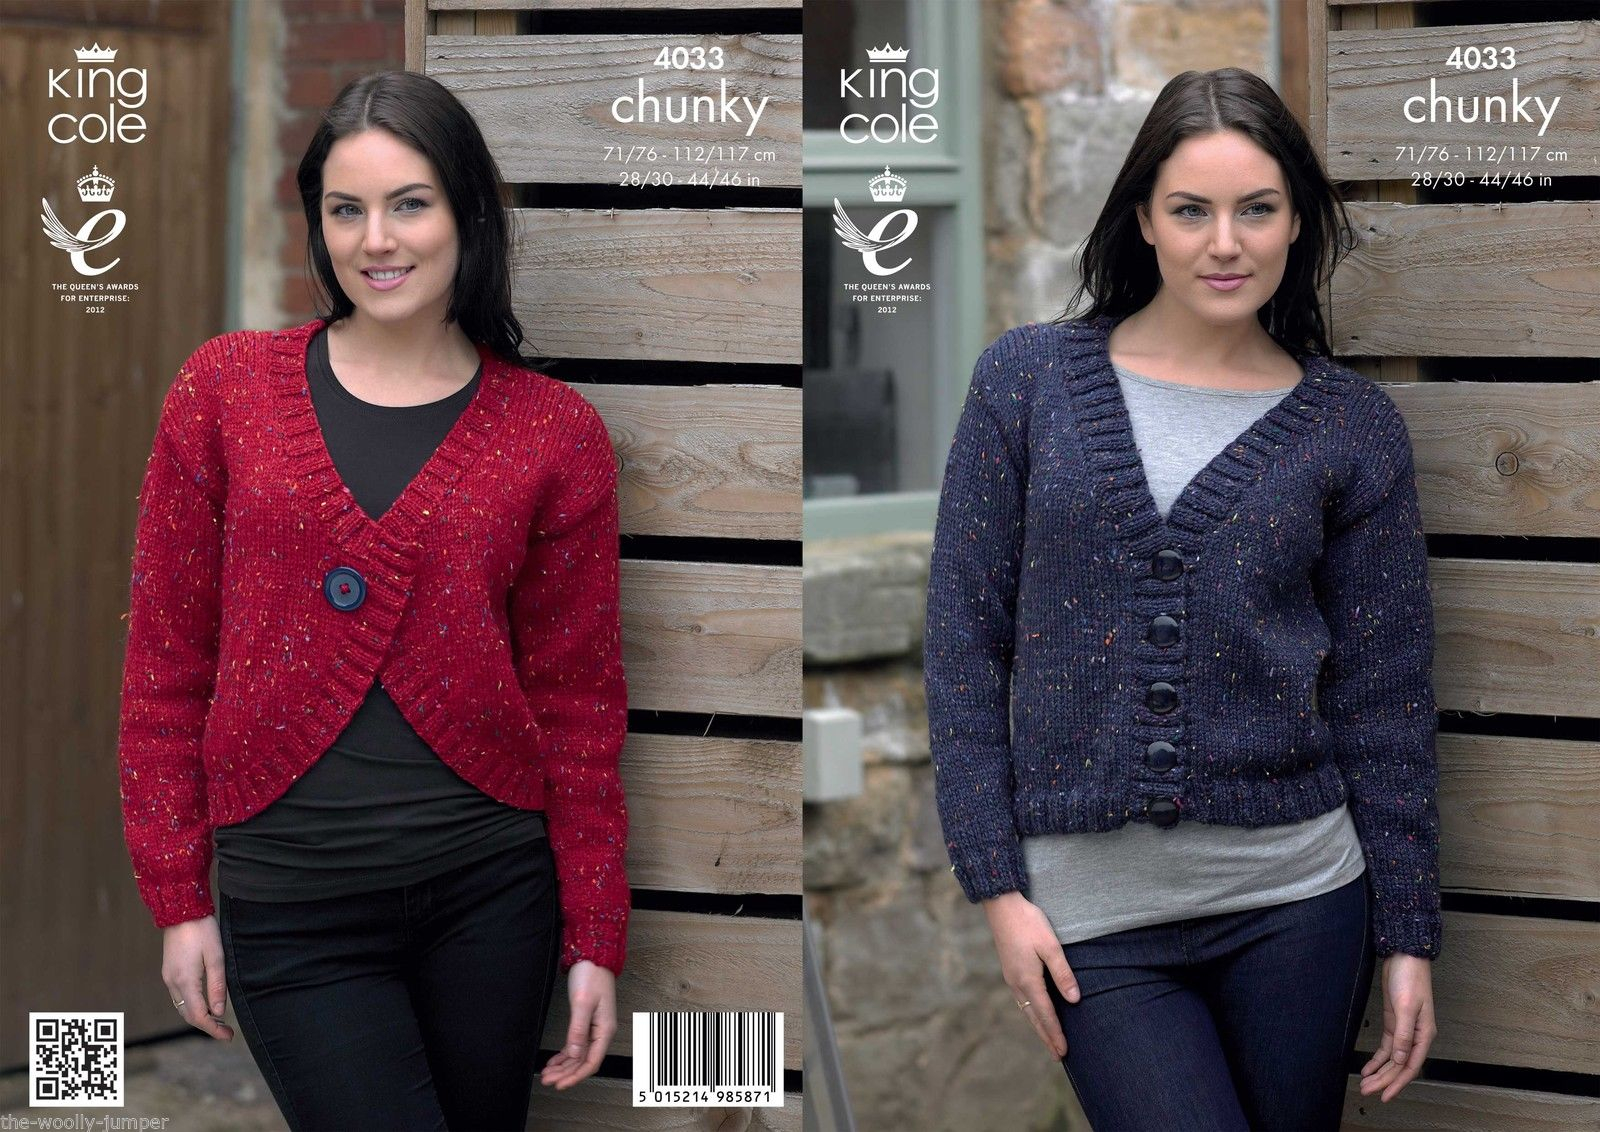 Tweed Knitting Patterns 4033 King Cole Chunky Tweed Cardigan Jacket Knitting Pattern To Fit Chest 28 To 46